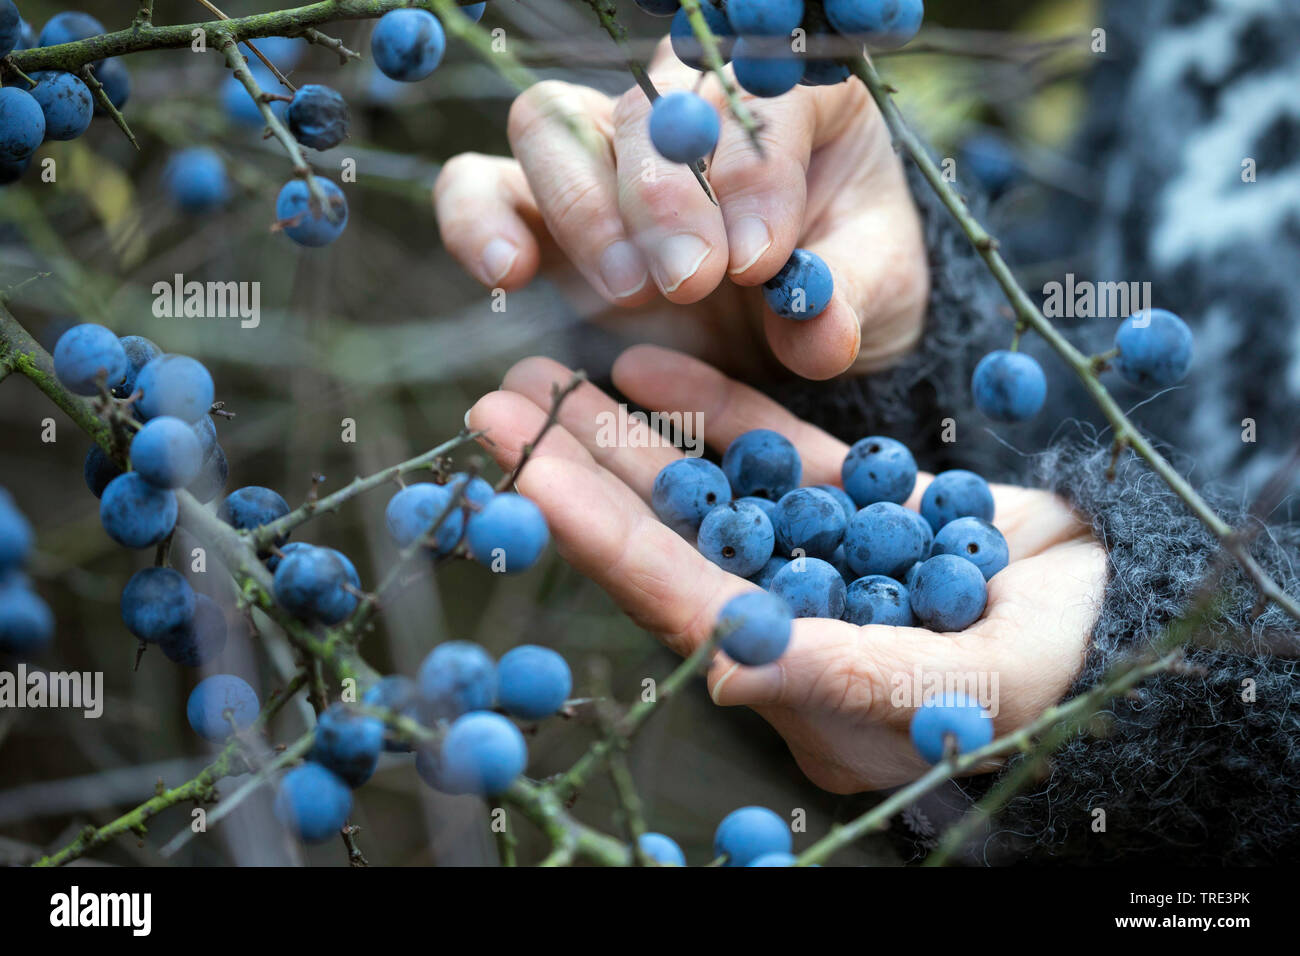 blackthorn, sloe (Prunus spinosa), woman collecting fruits of blackthorn, Germany Stock Photo